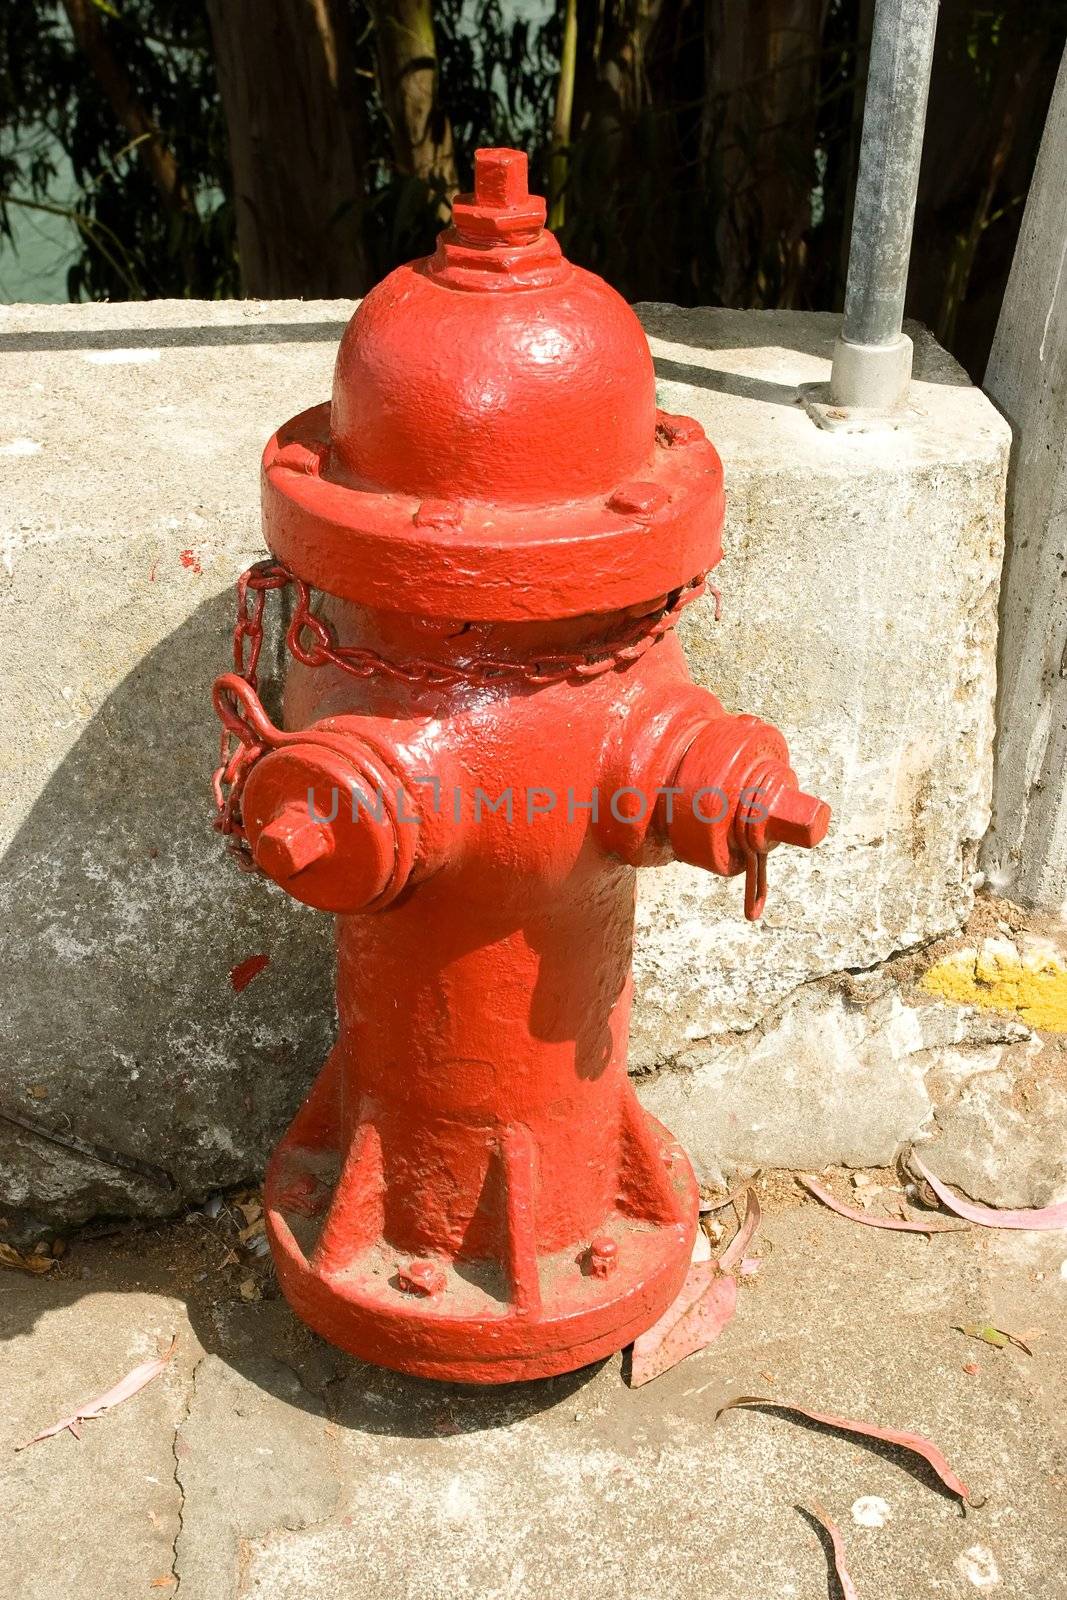 A fire hydrant (also known colloquially as a fire plug in the United States or as a johnny pump in New York City, because the firemen of the late 1800's were called Johnnies)